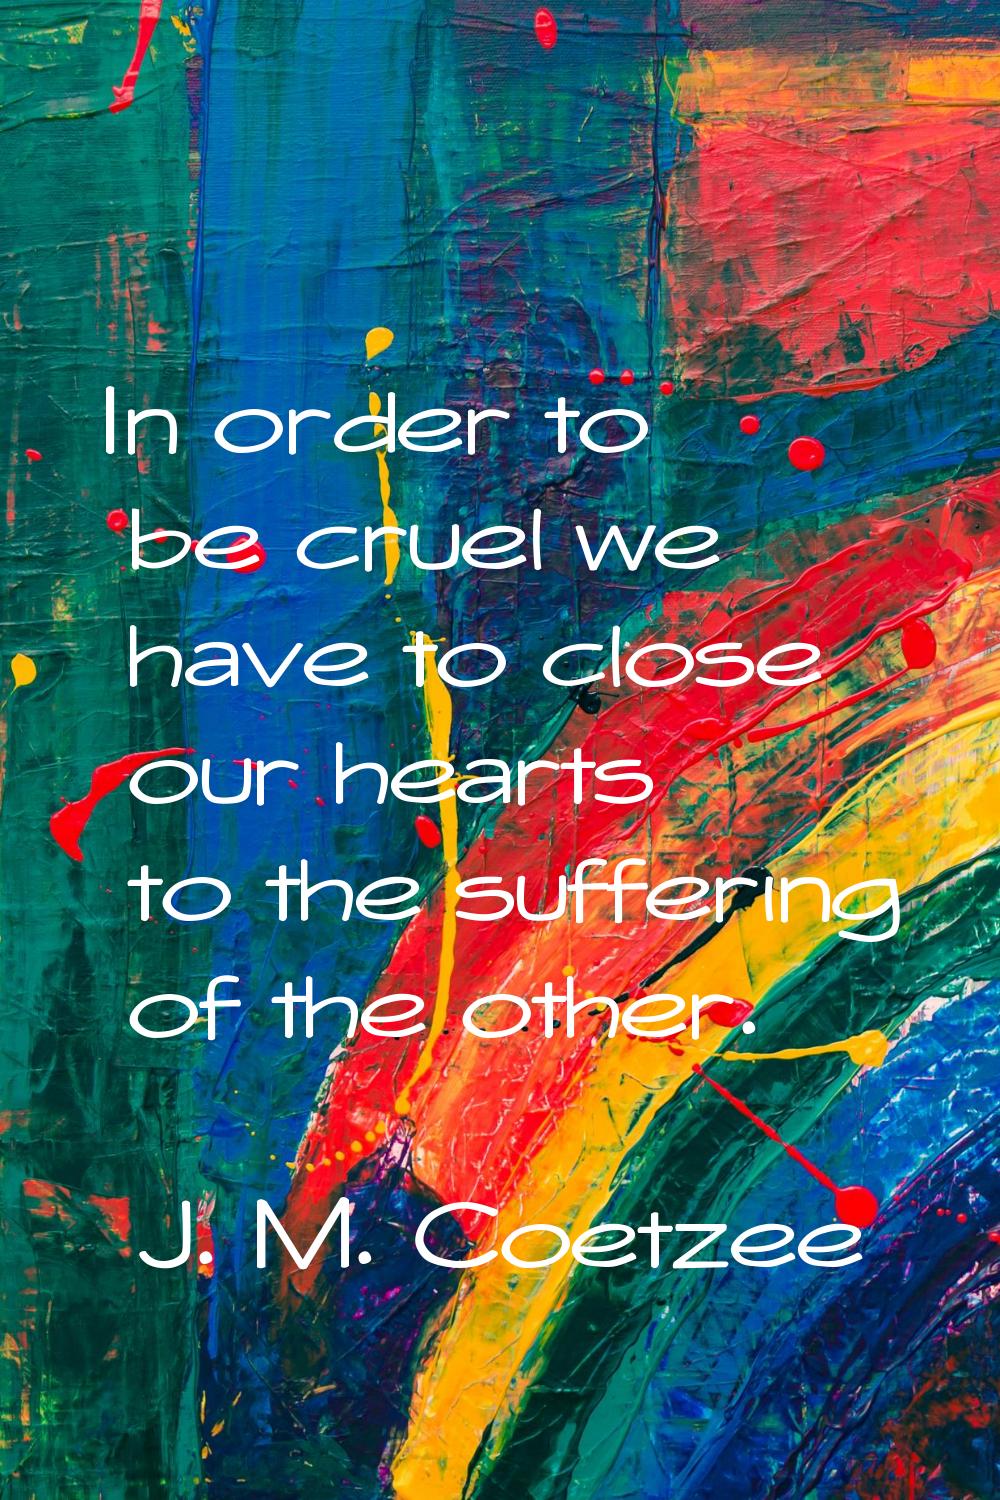 In order to be cruel we have to close our hearts to the suffering of the other.